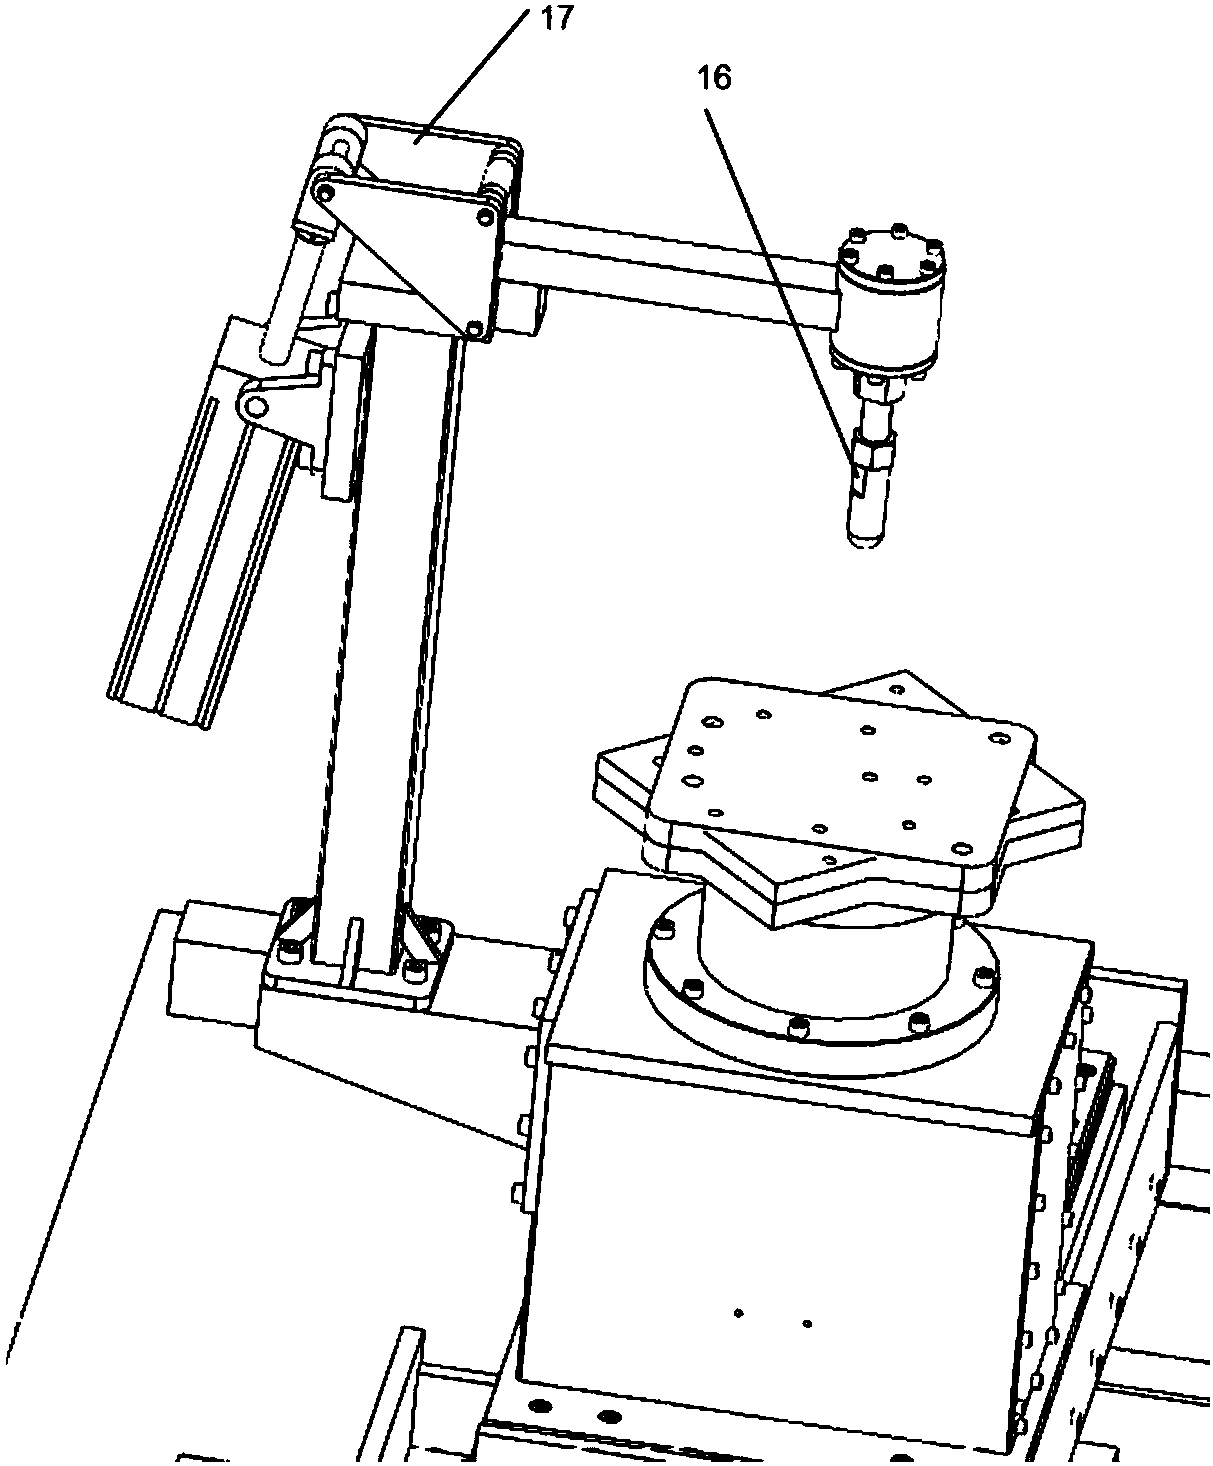 Grinder provided with compressing mechanism